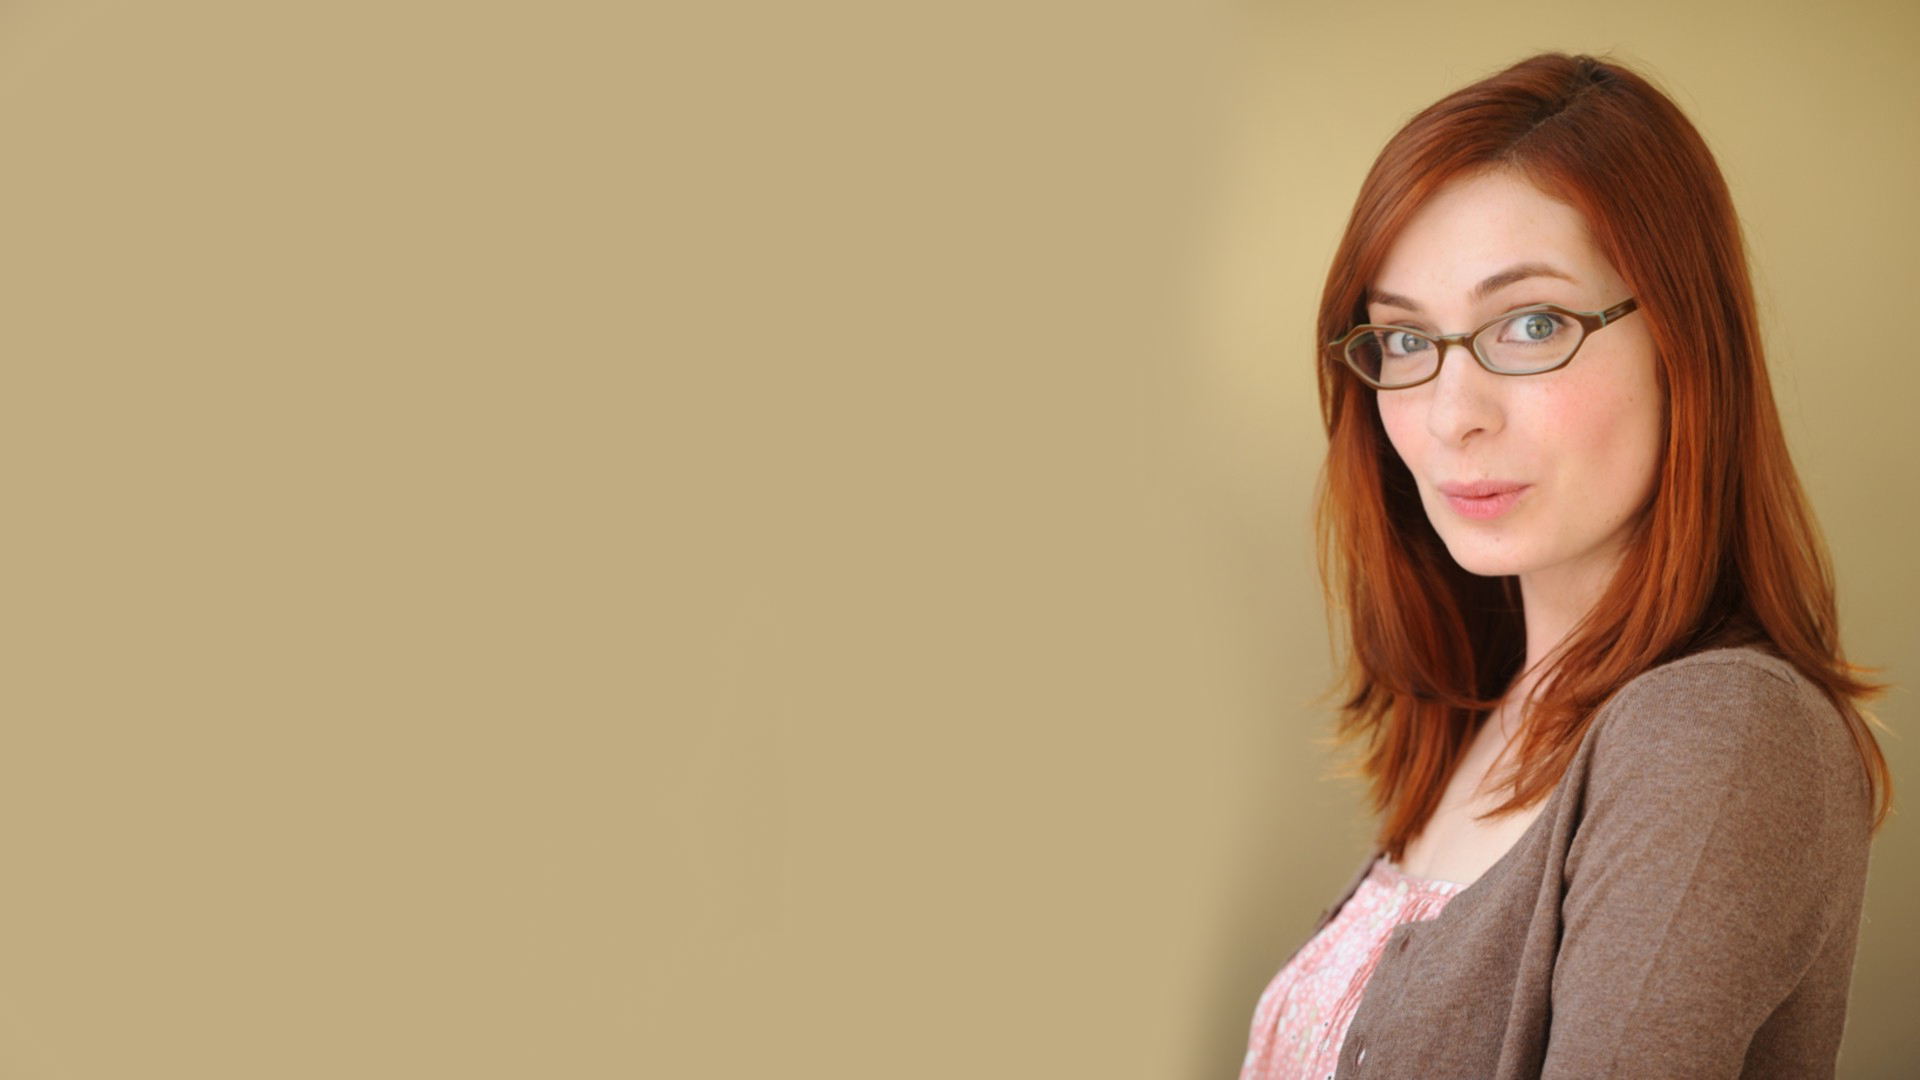 Felicia Day Wallpapers Nice HDQ Live Felicia Day